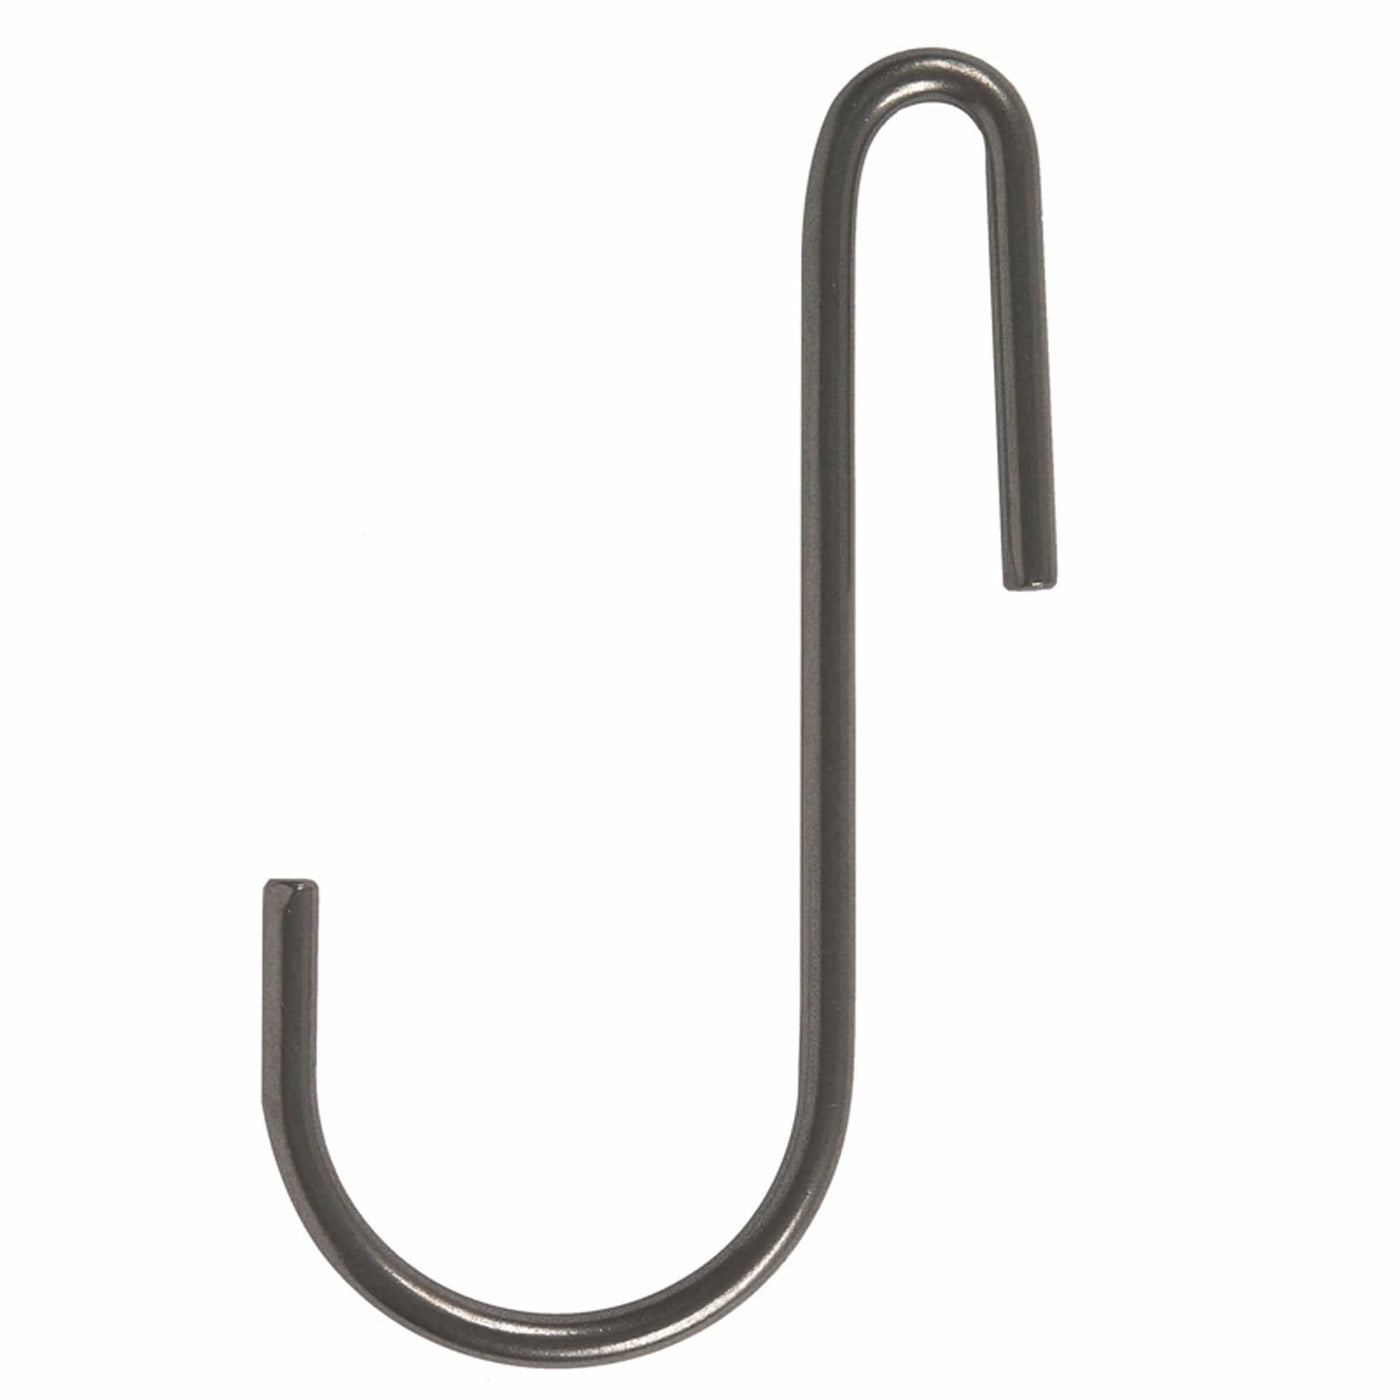 4.5 Angled Pot Hooks 6 Pack - Enclume Design Products